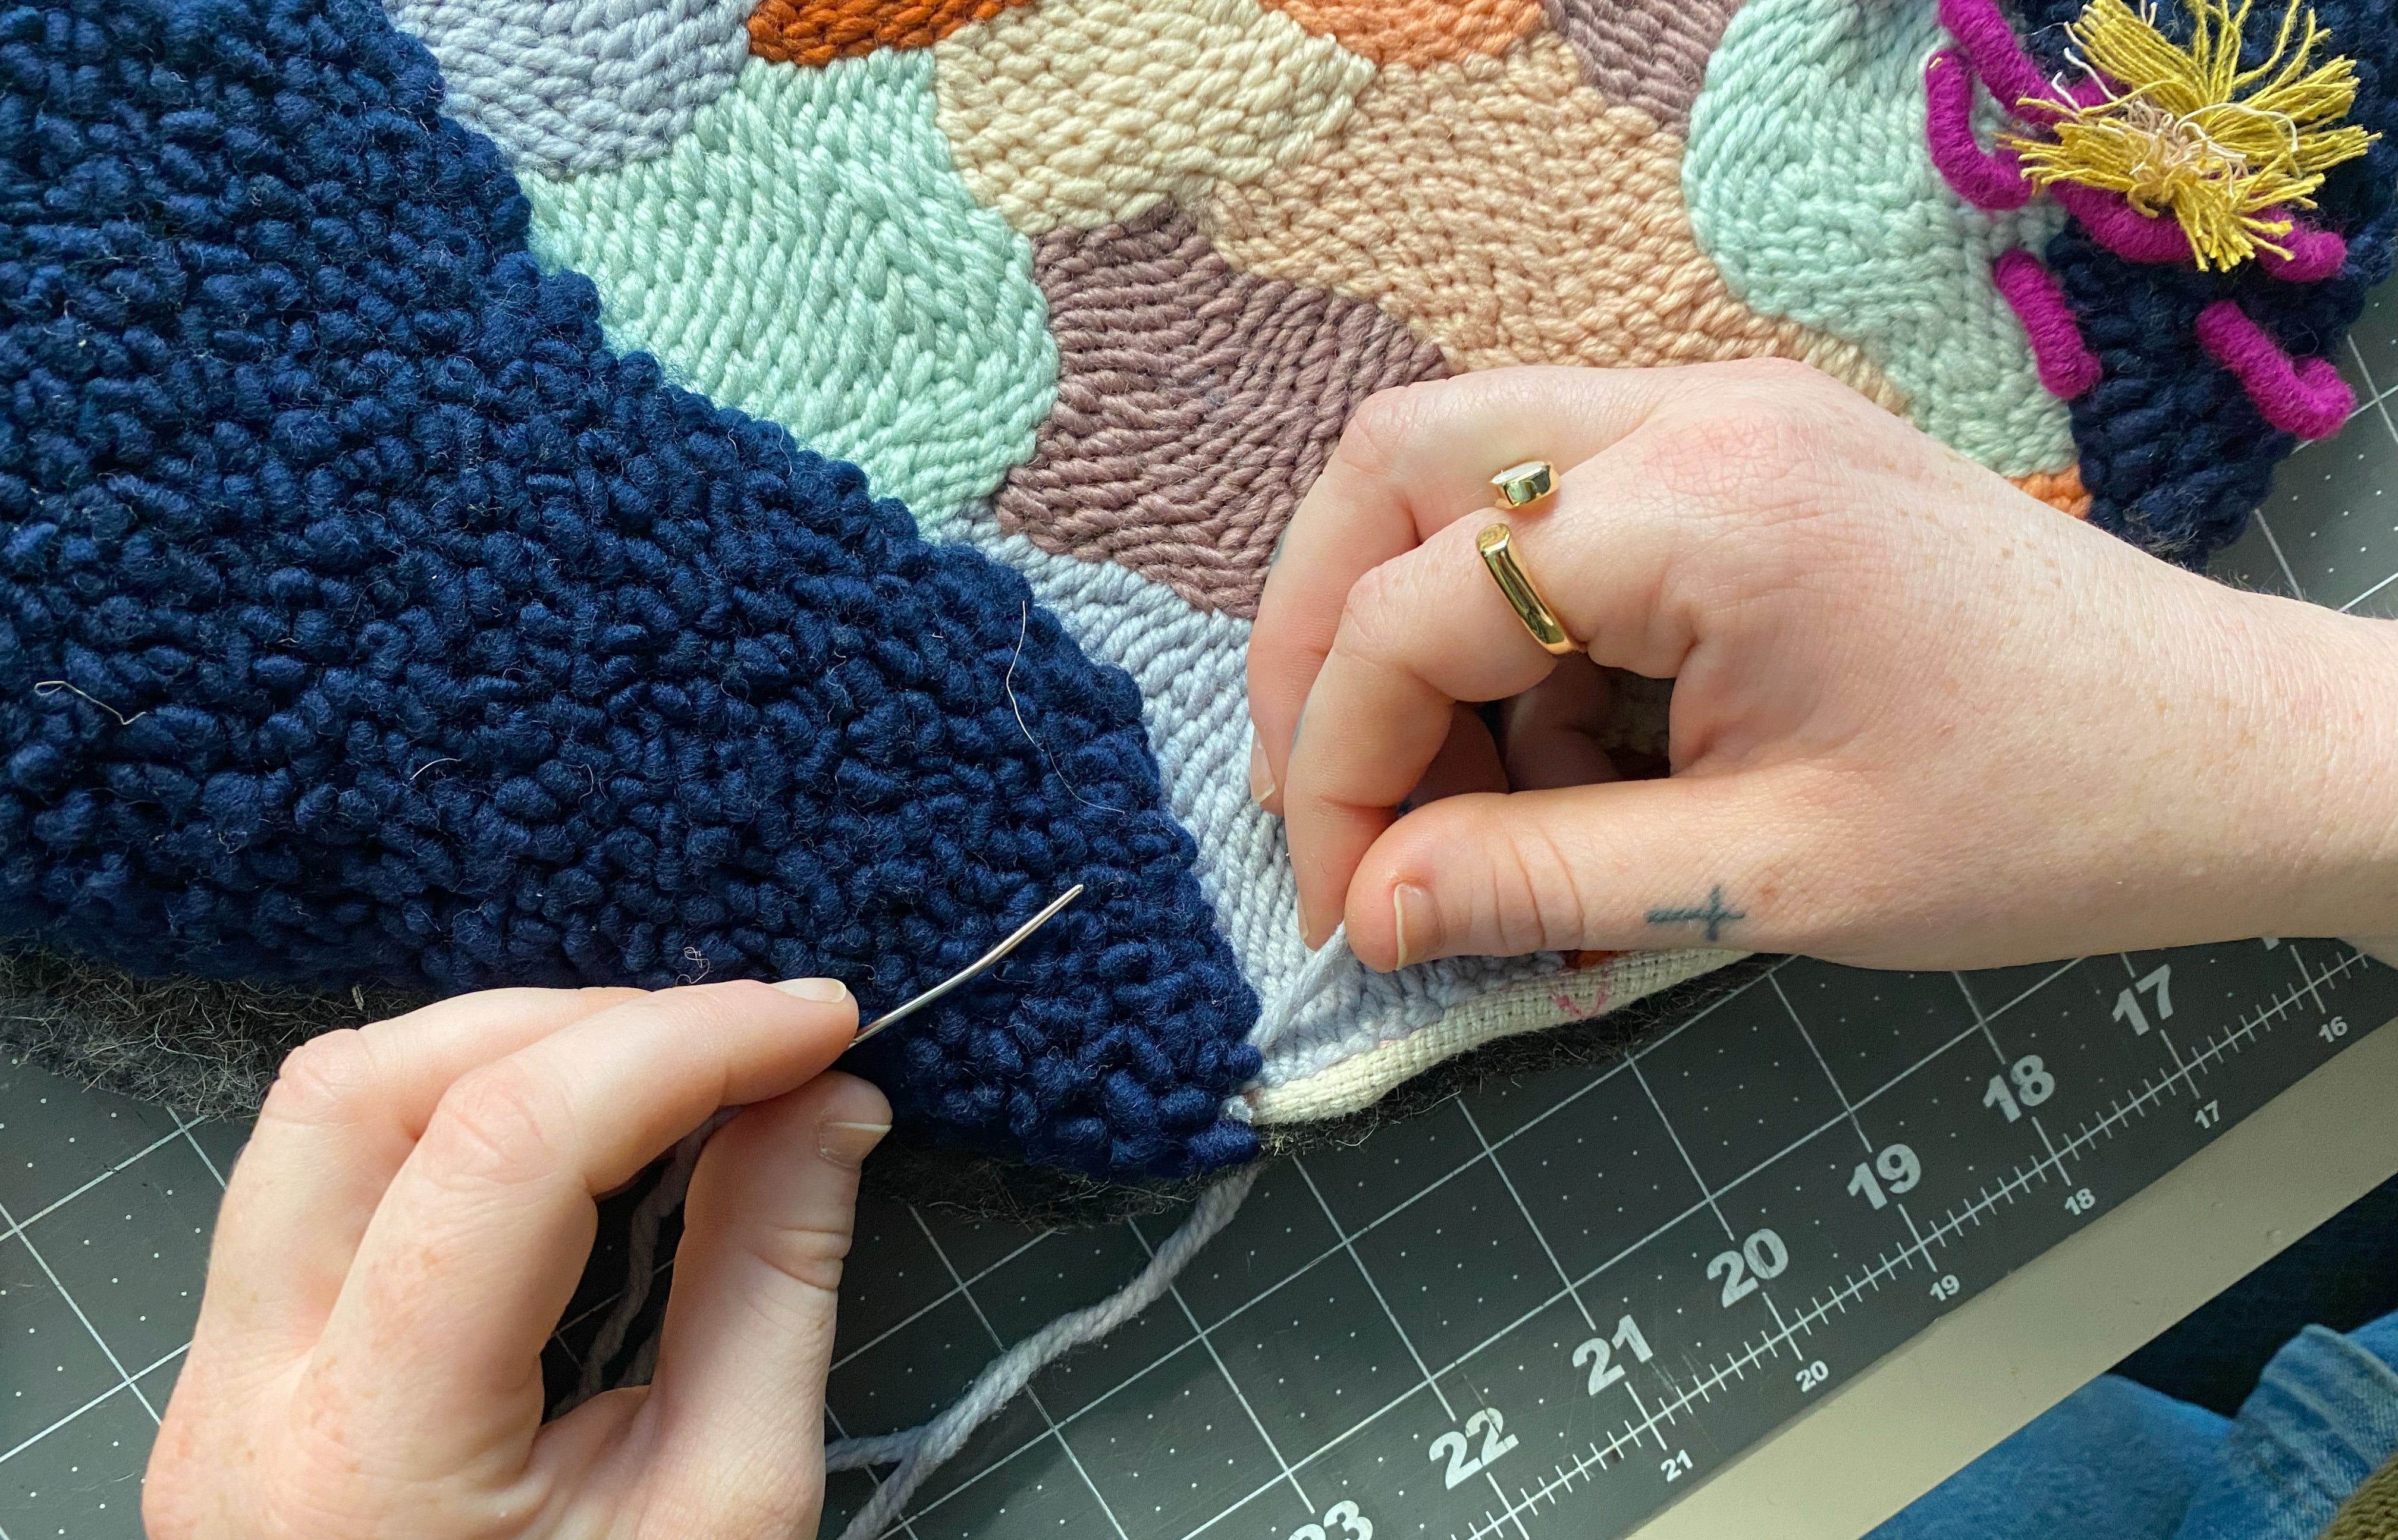 How To Back Punch Needle Projects with Industrial Felt Featuring Katie Berman Tutorial Tails